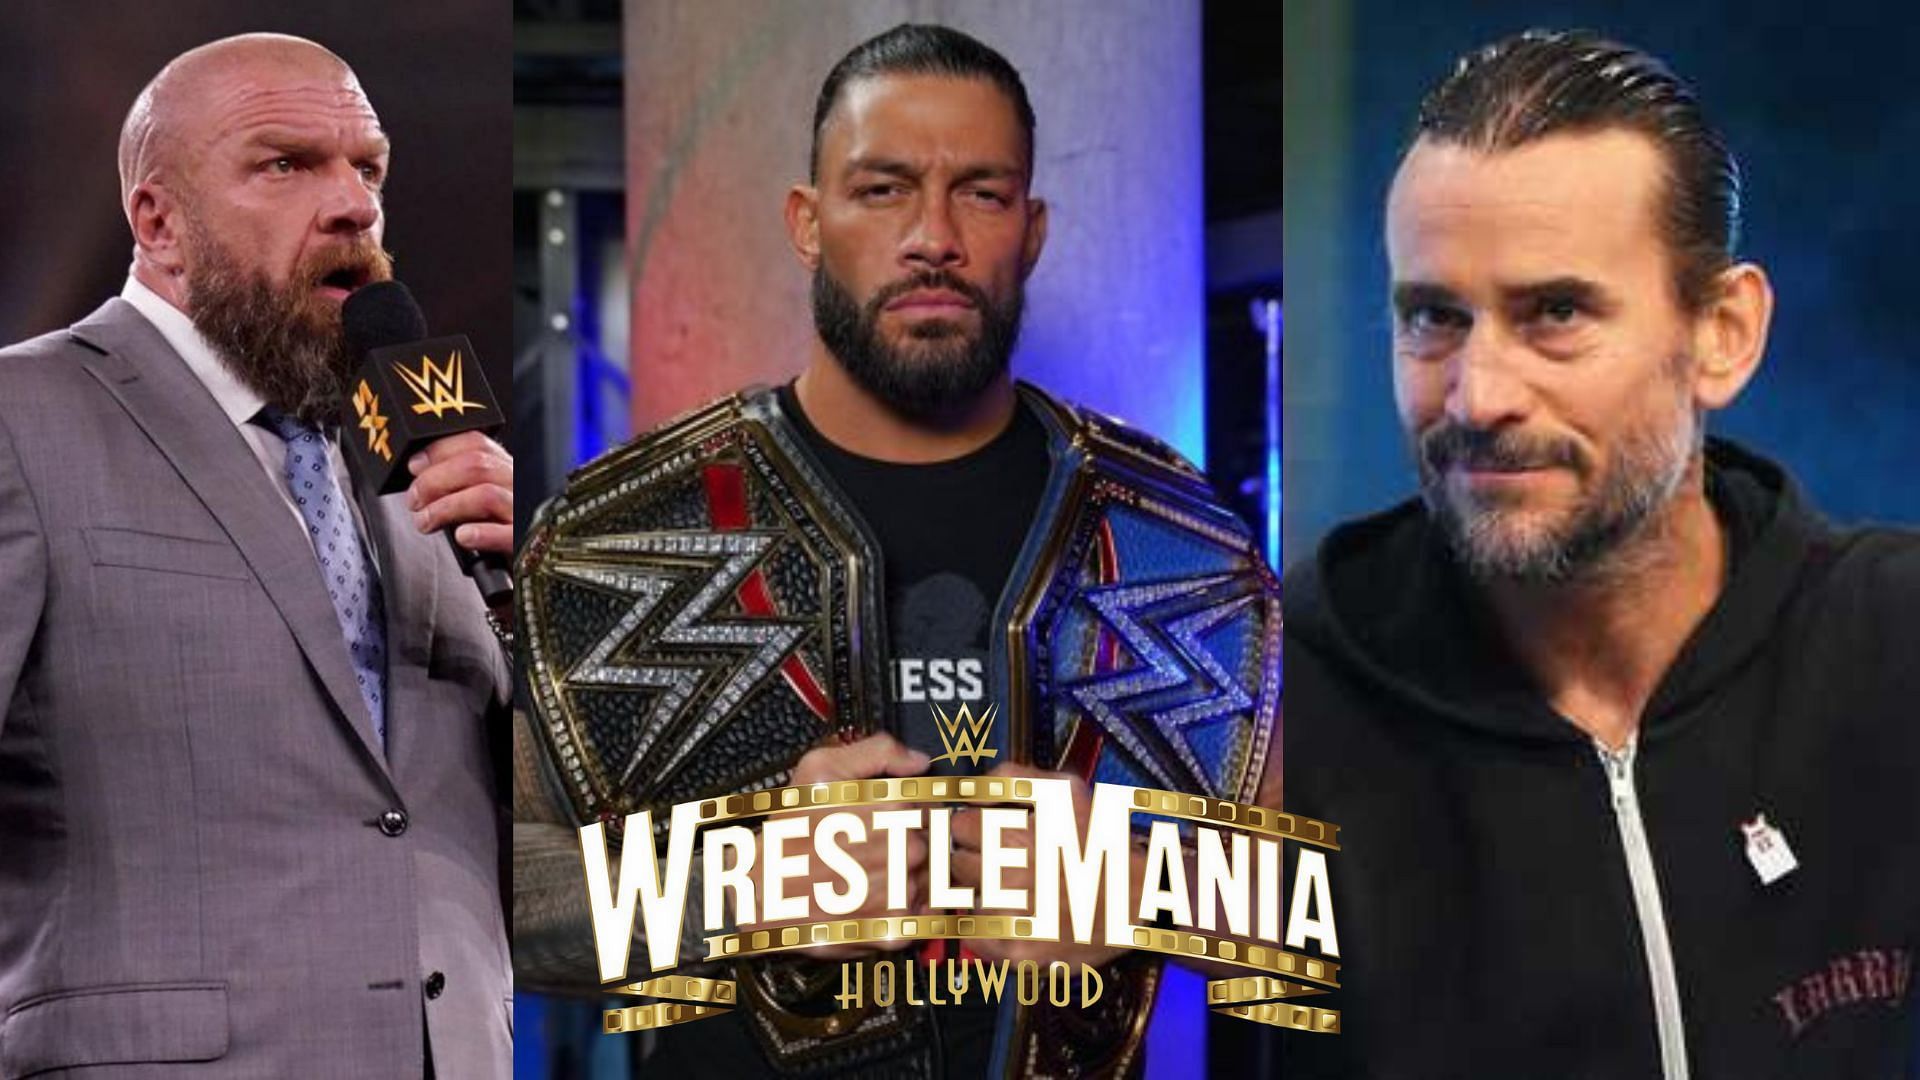 Could Triple H bring CM Punk back to WWE to face Roman Reigns?